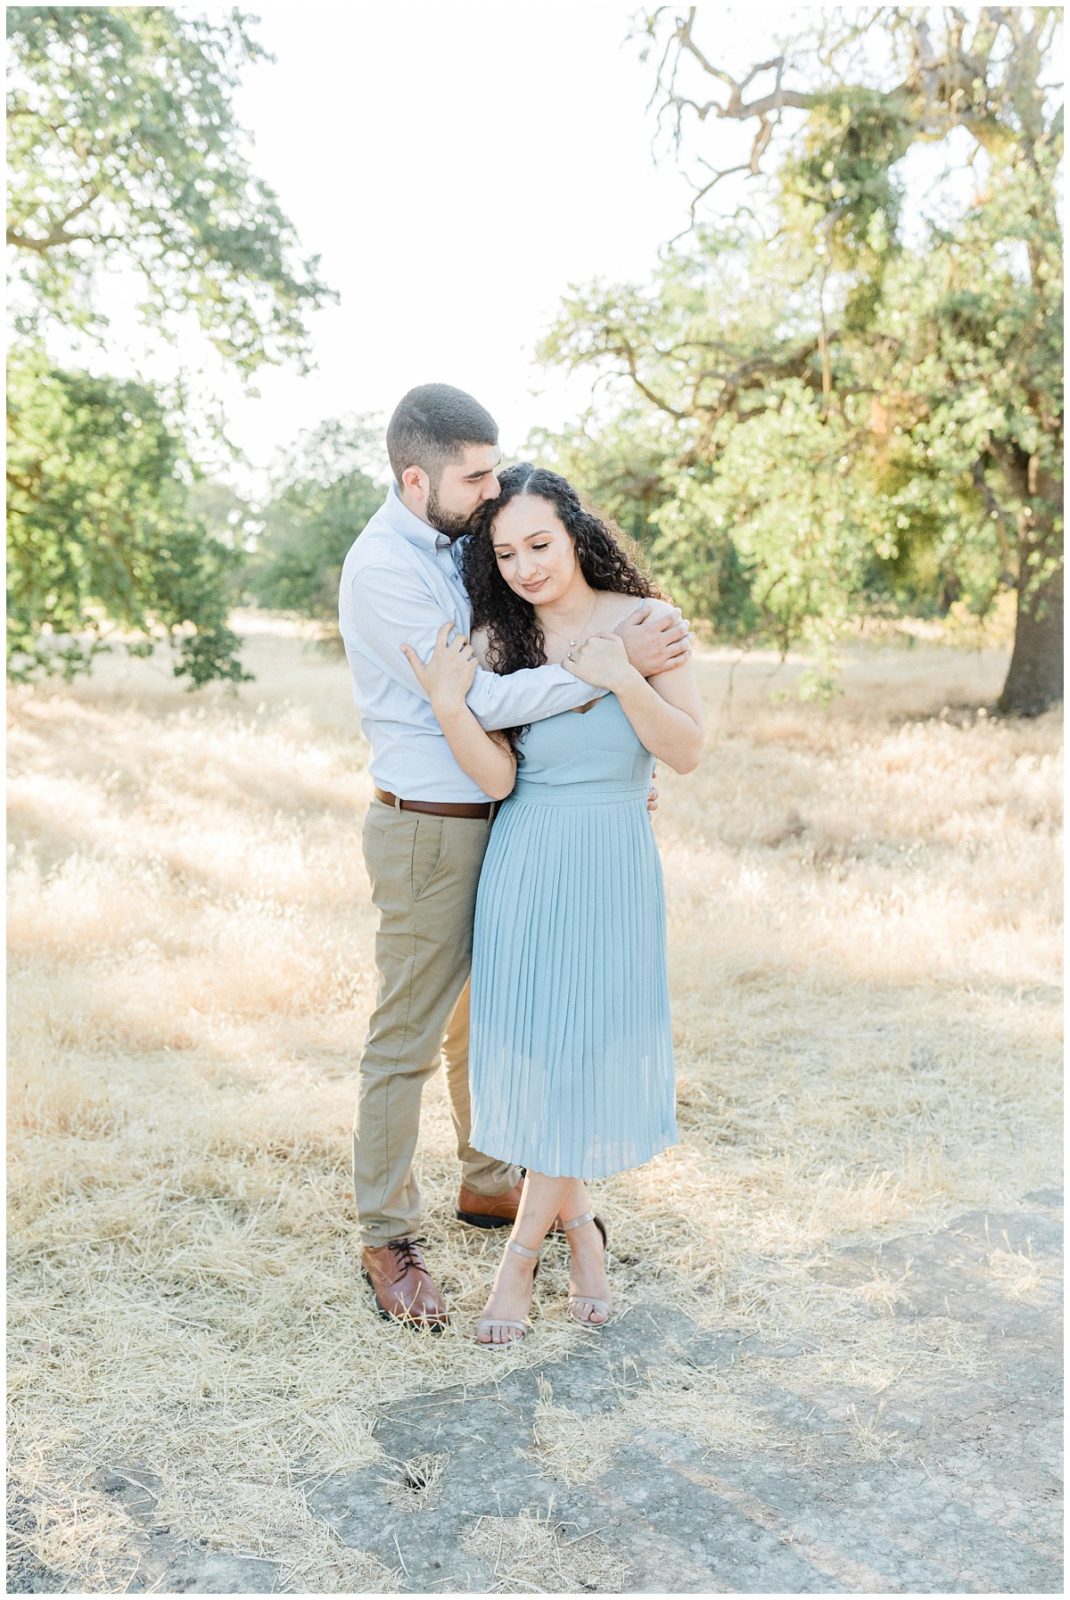 Engagement Outfit Inspo in Dusty Blue